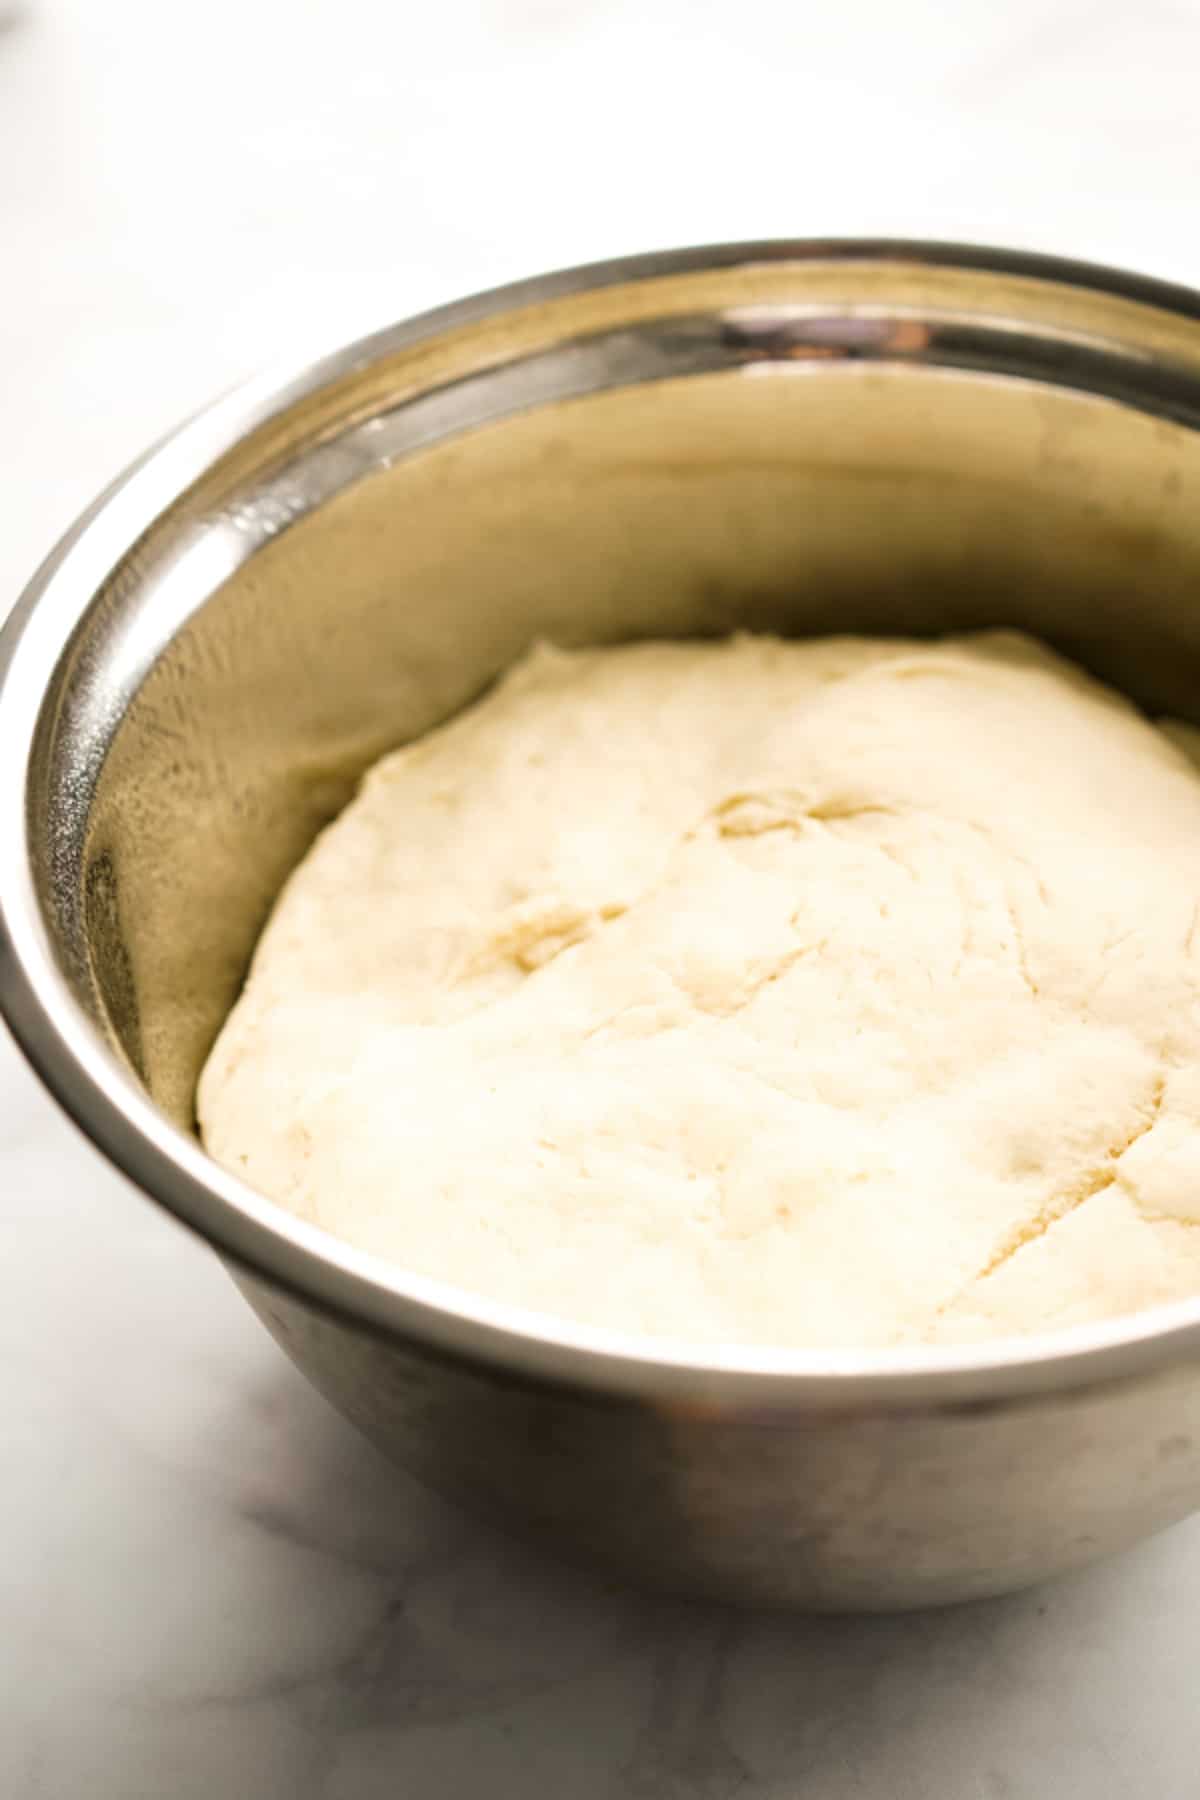 Dough for rolls after it has risen for an hour